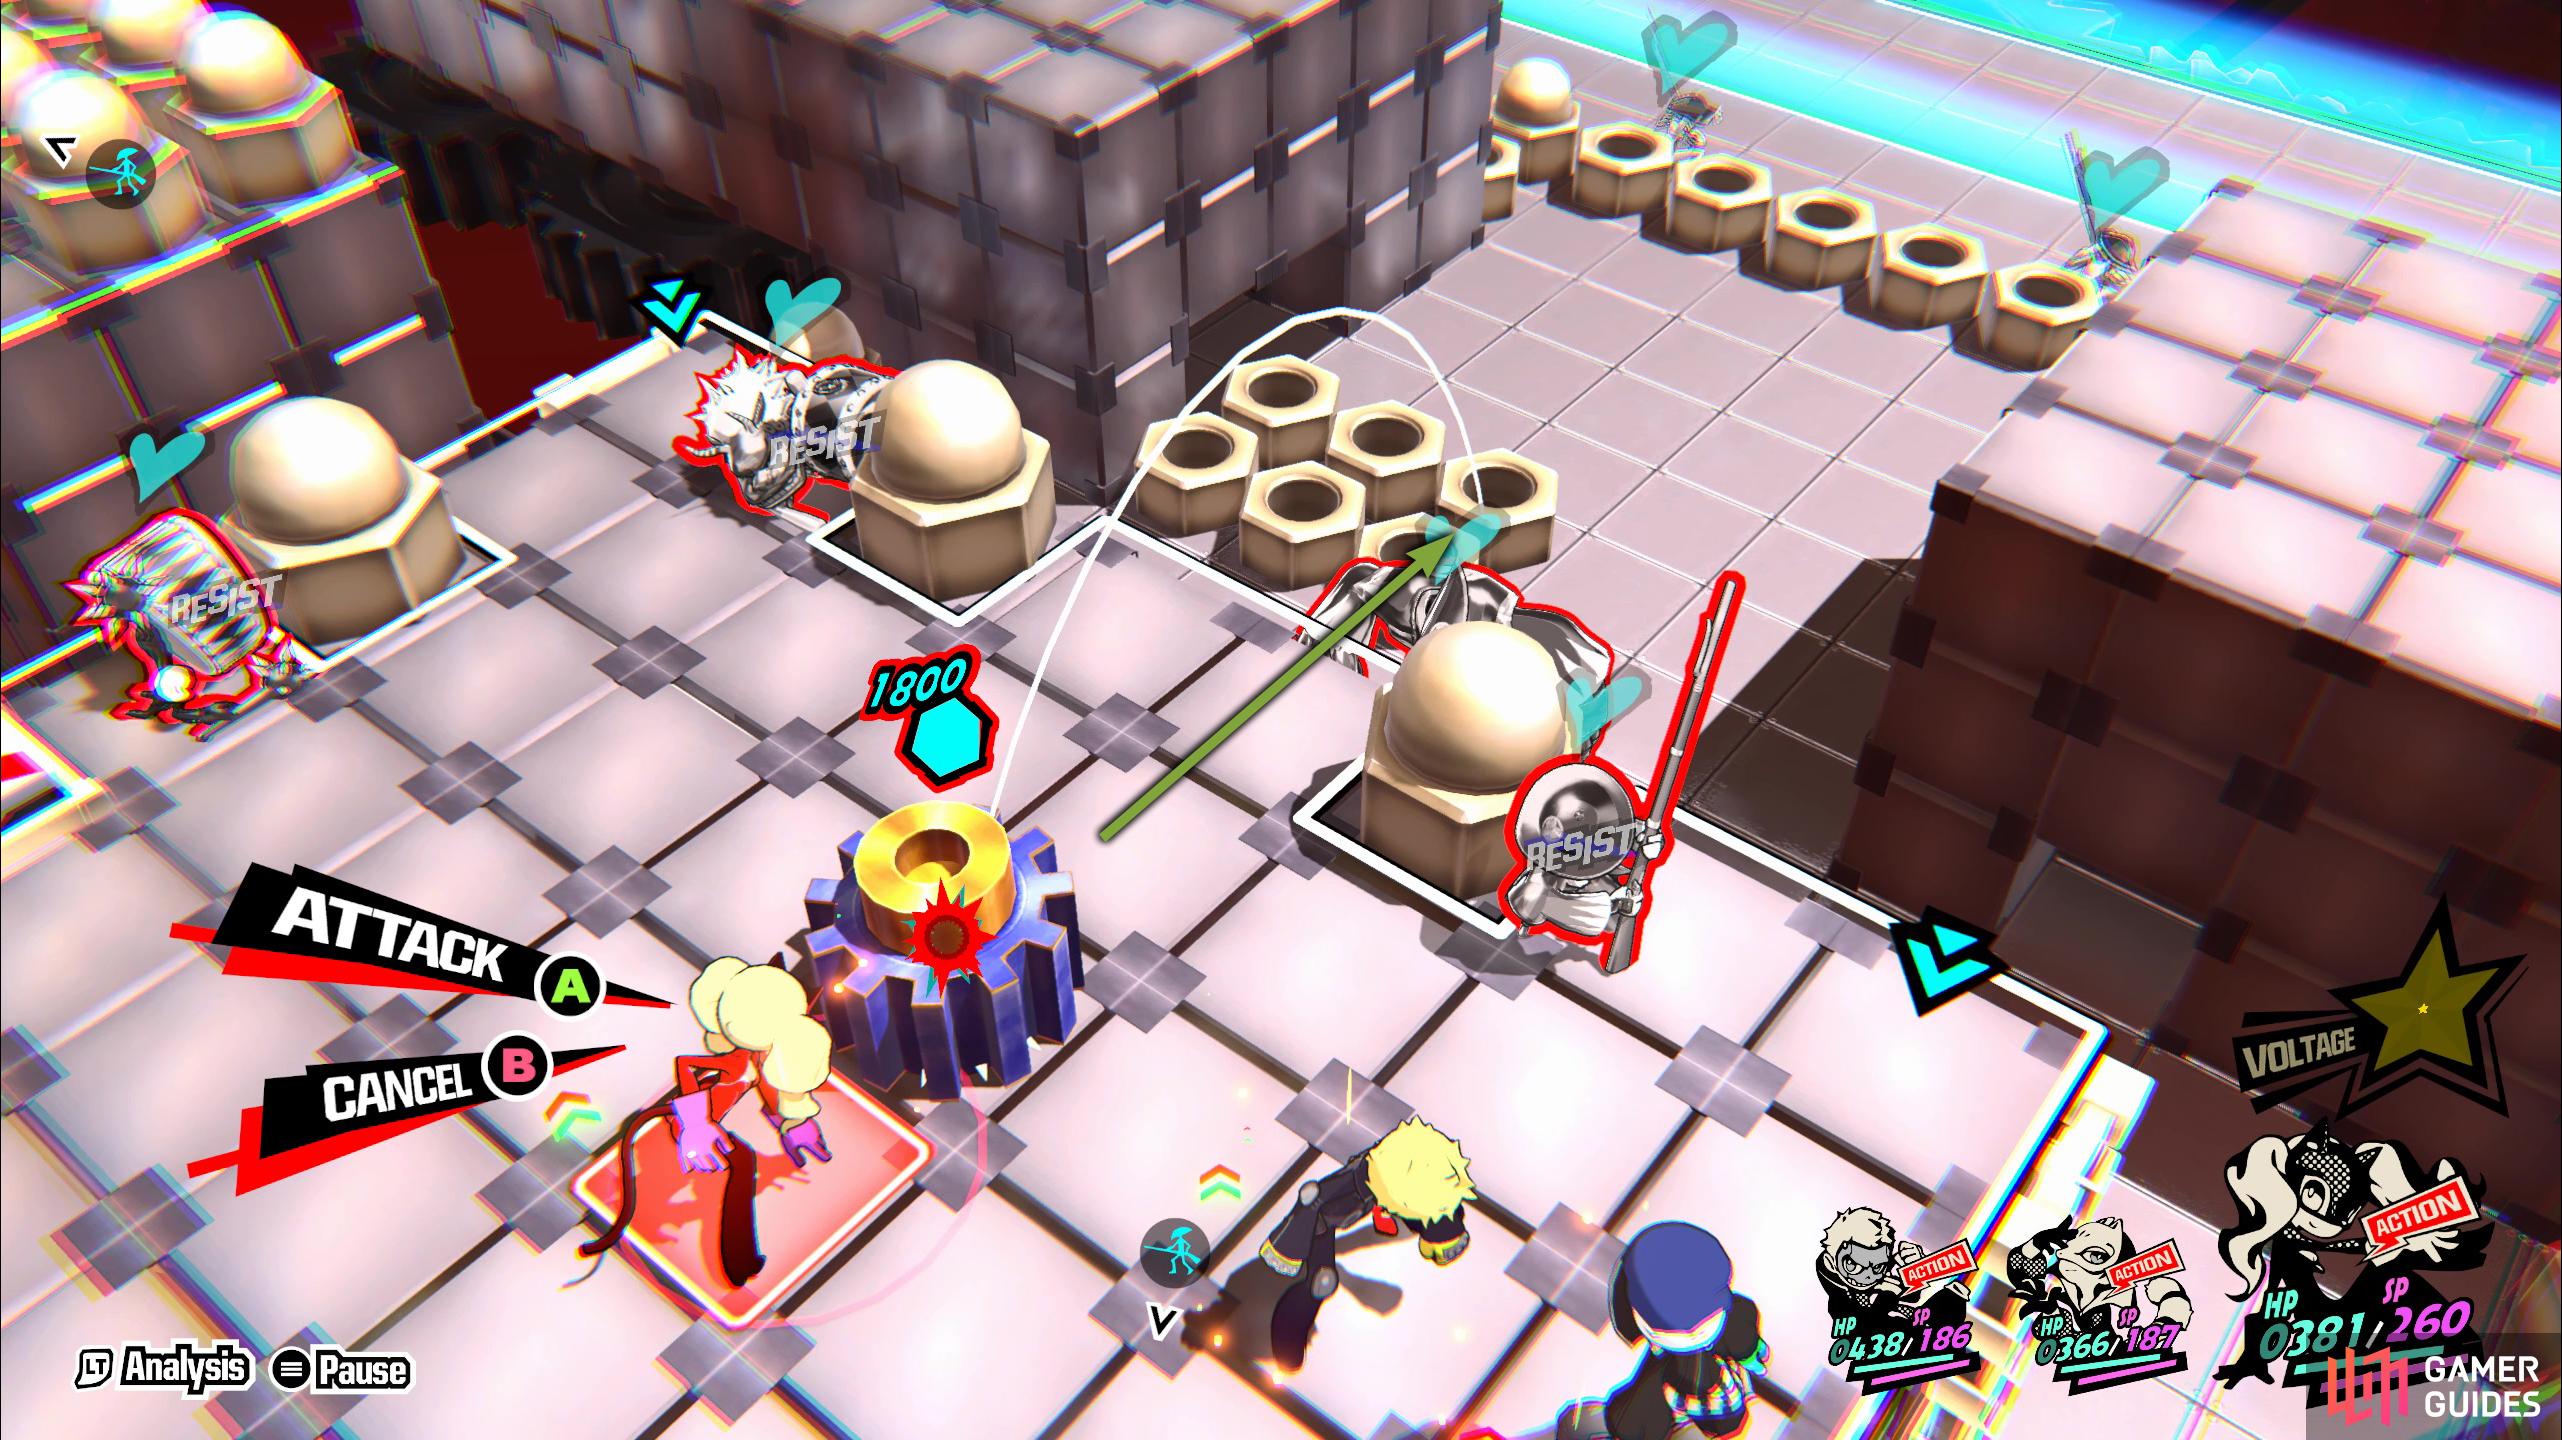 Step 1: Select the member who has access to healing, and attack the gear off the platform, toward the goal.